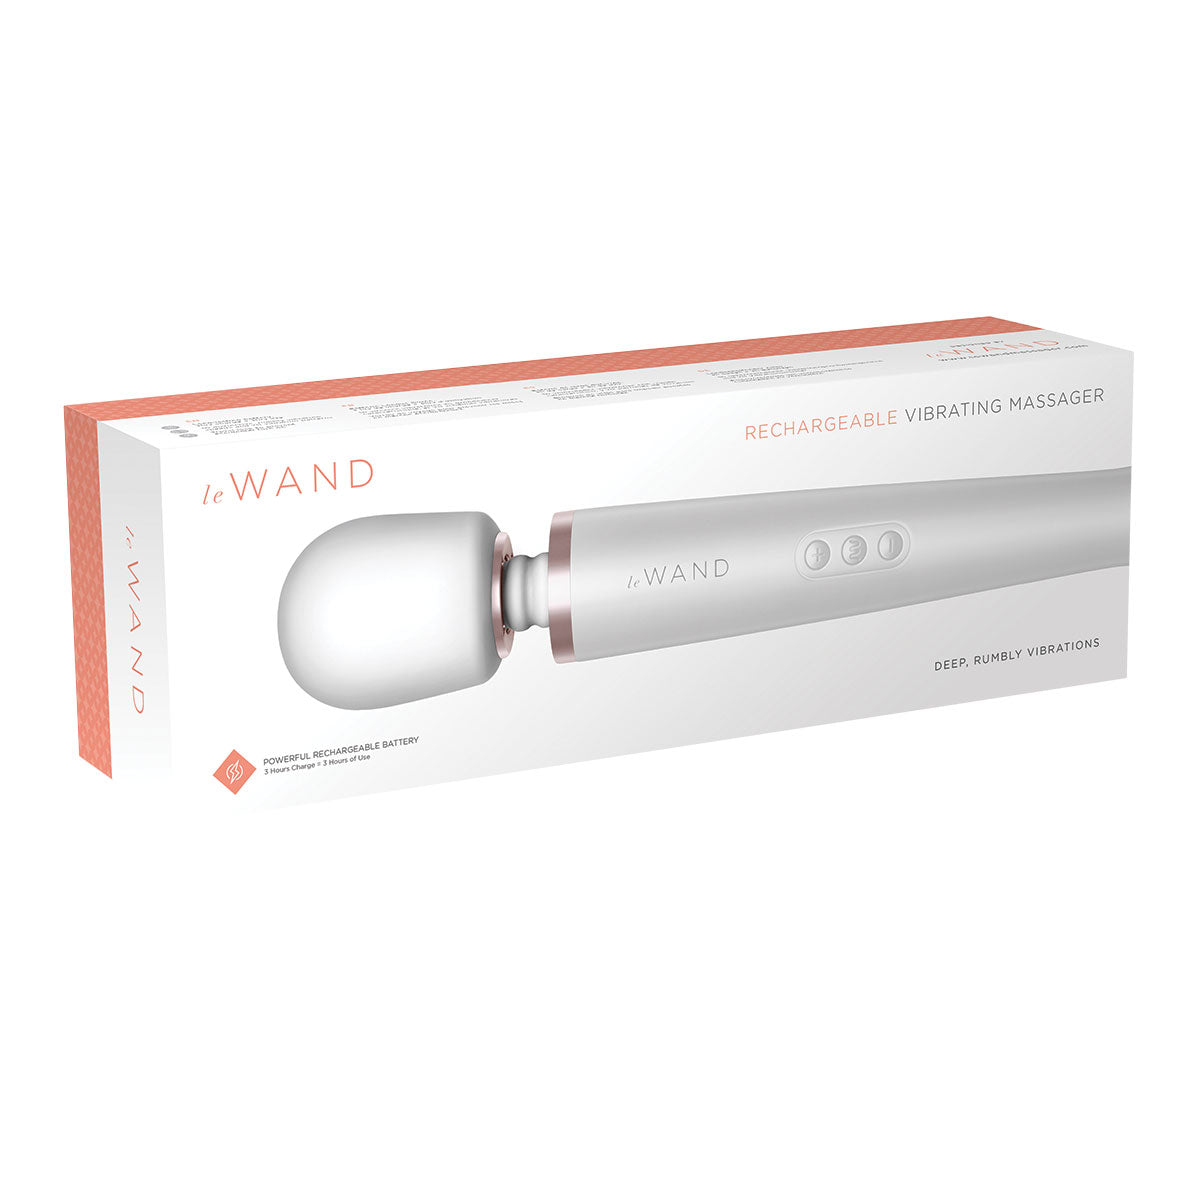 Le Wand Rechargeable Vibrating Massager Feel My Power